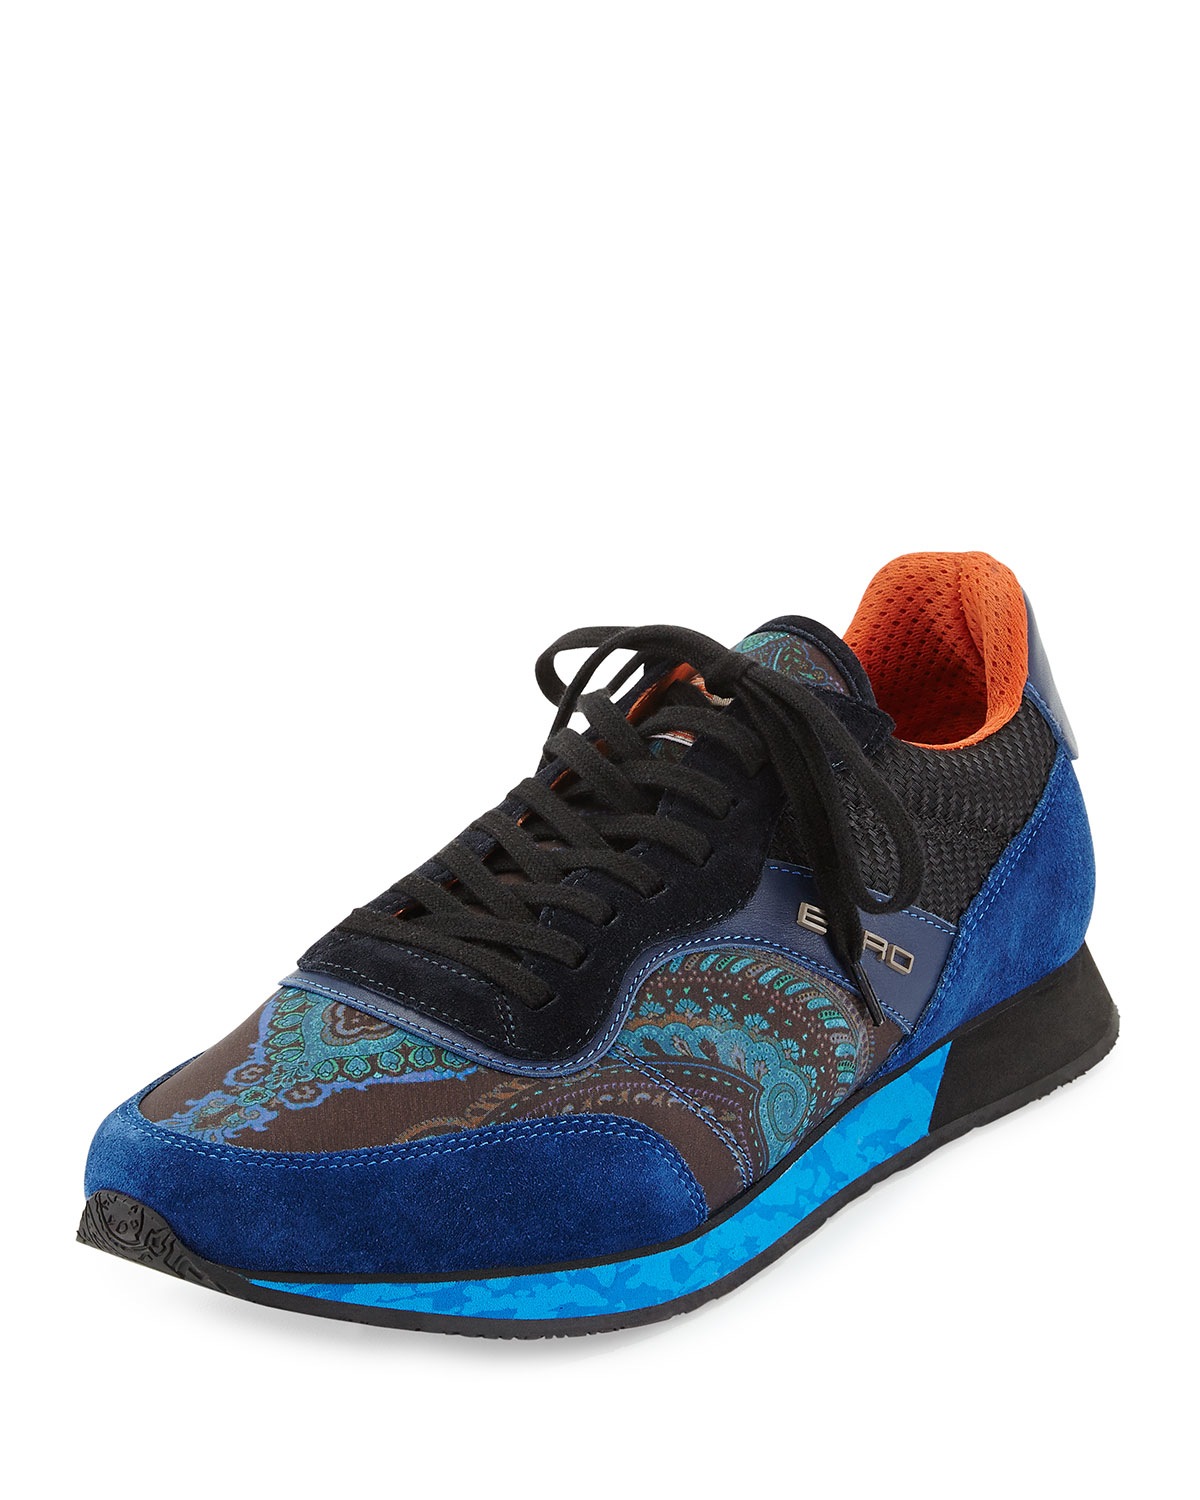 Etro Paisley Print Panelled Sneakers in Black for Men | Lyst